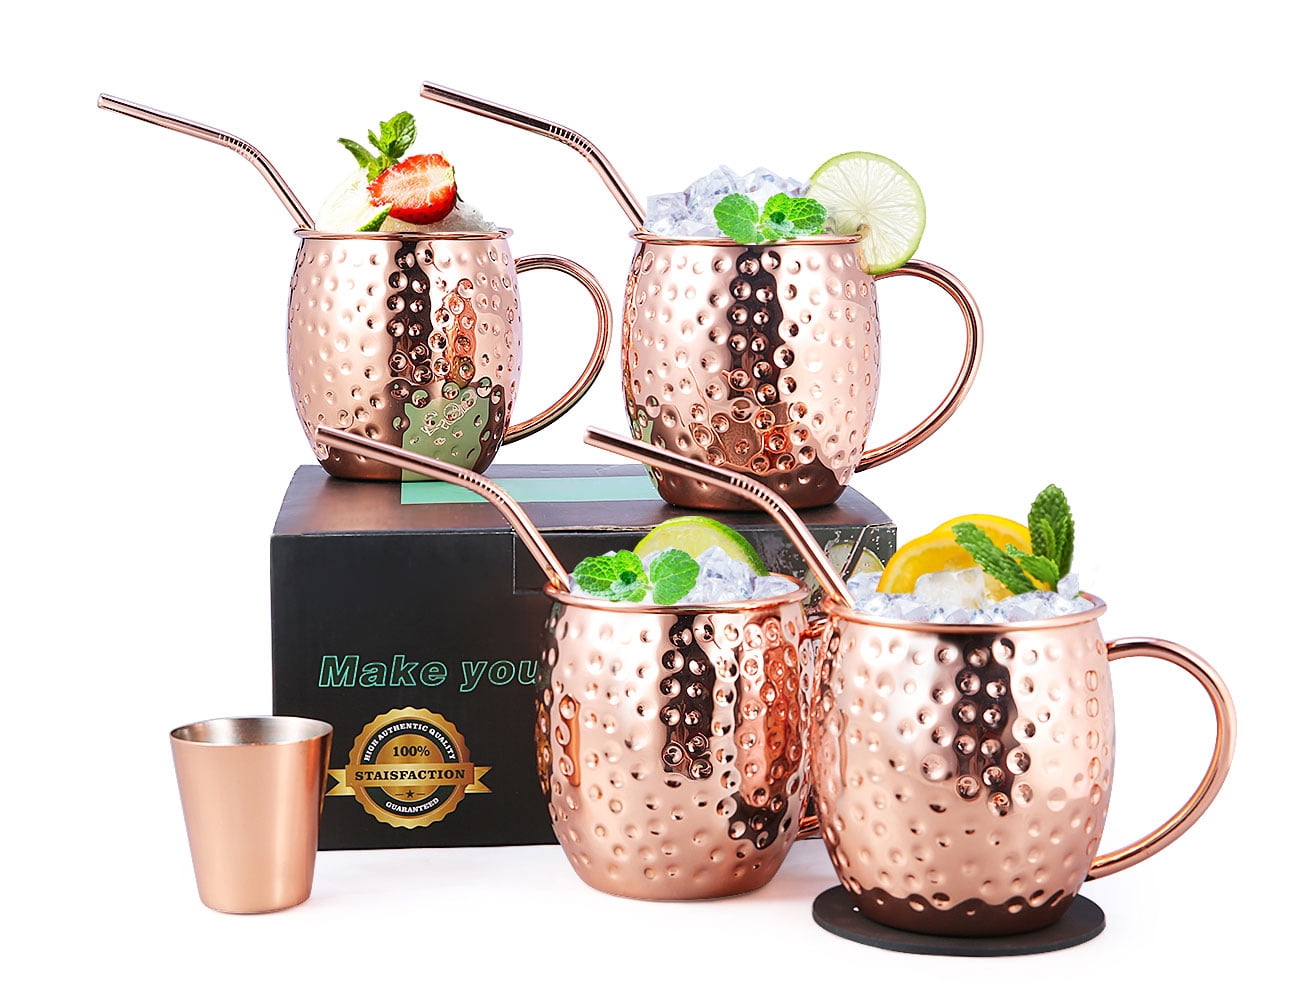 The Moscow Mule Cocktail Gift Set Includes Cocktail Kit and Set of 2 Moscow Mule Copper Mugs 